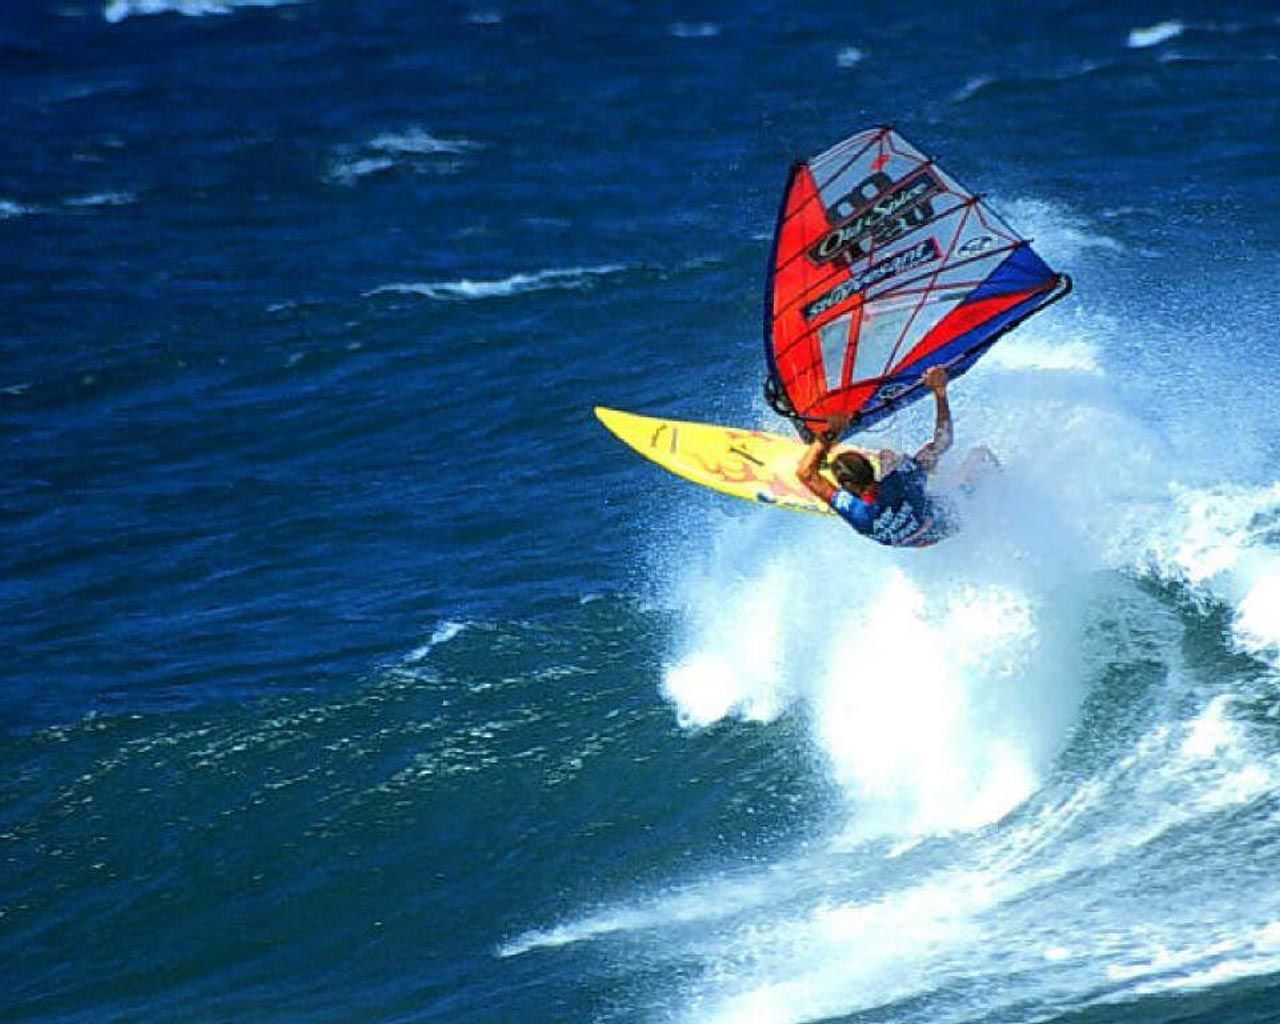 Sports Wallpaper Free Wind Surfing 8 Wallpaper, Photo, Picture and Background. Windsurfing, Surfing, Kite surfing